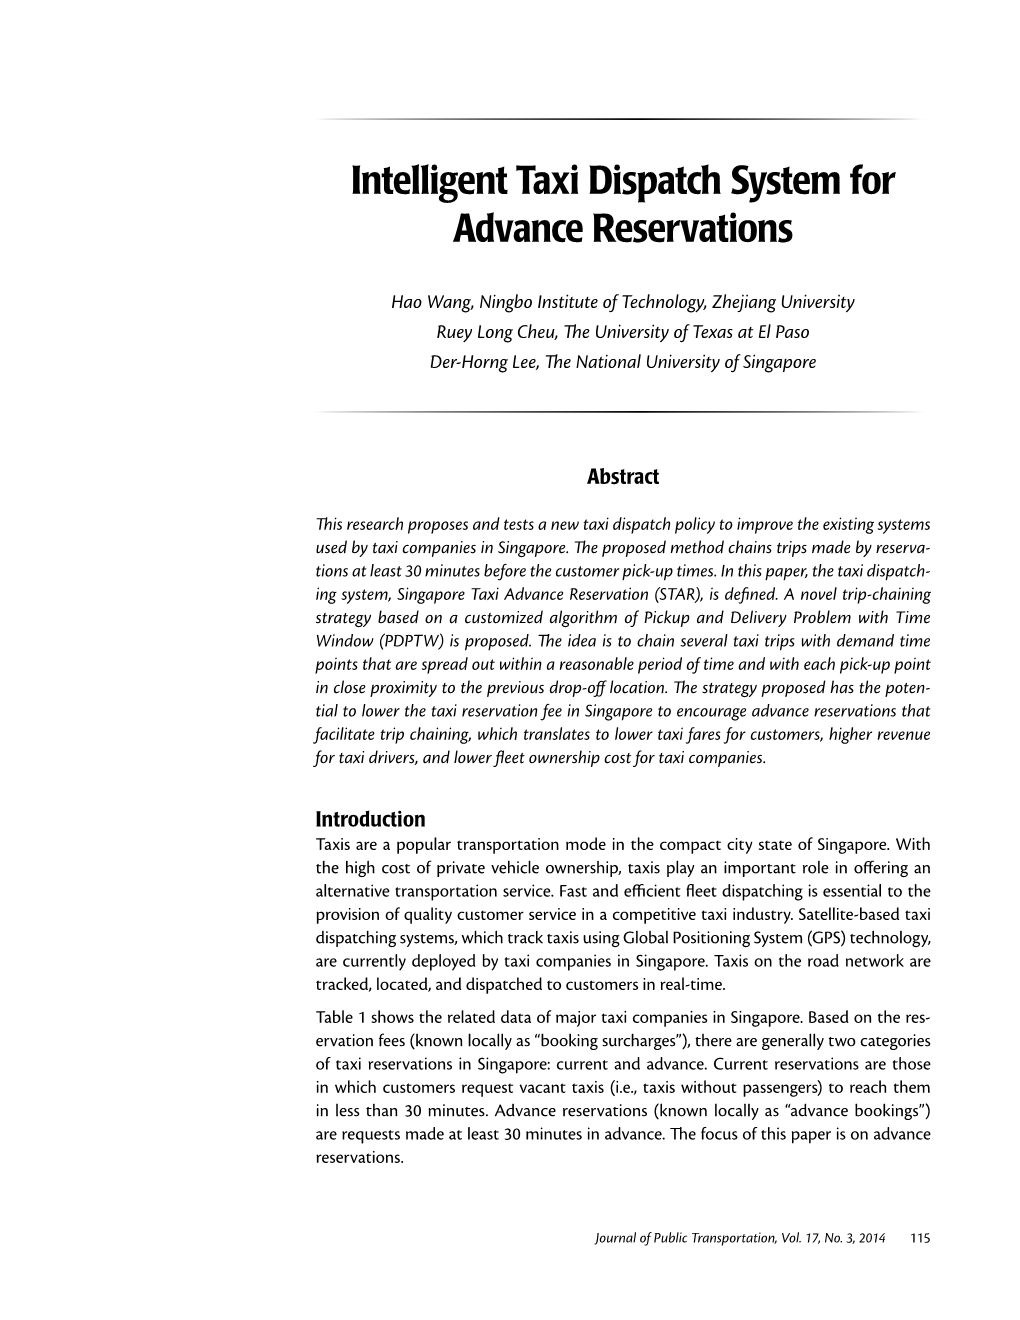 Intelligent Taxi Dispatch System for Advance Reservations